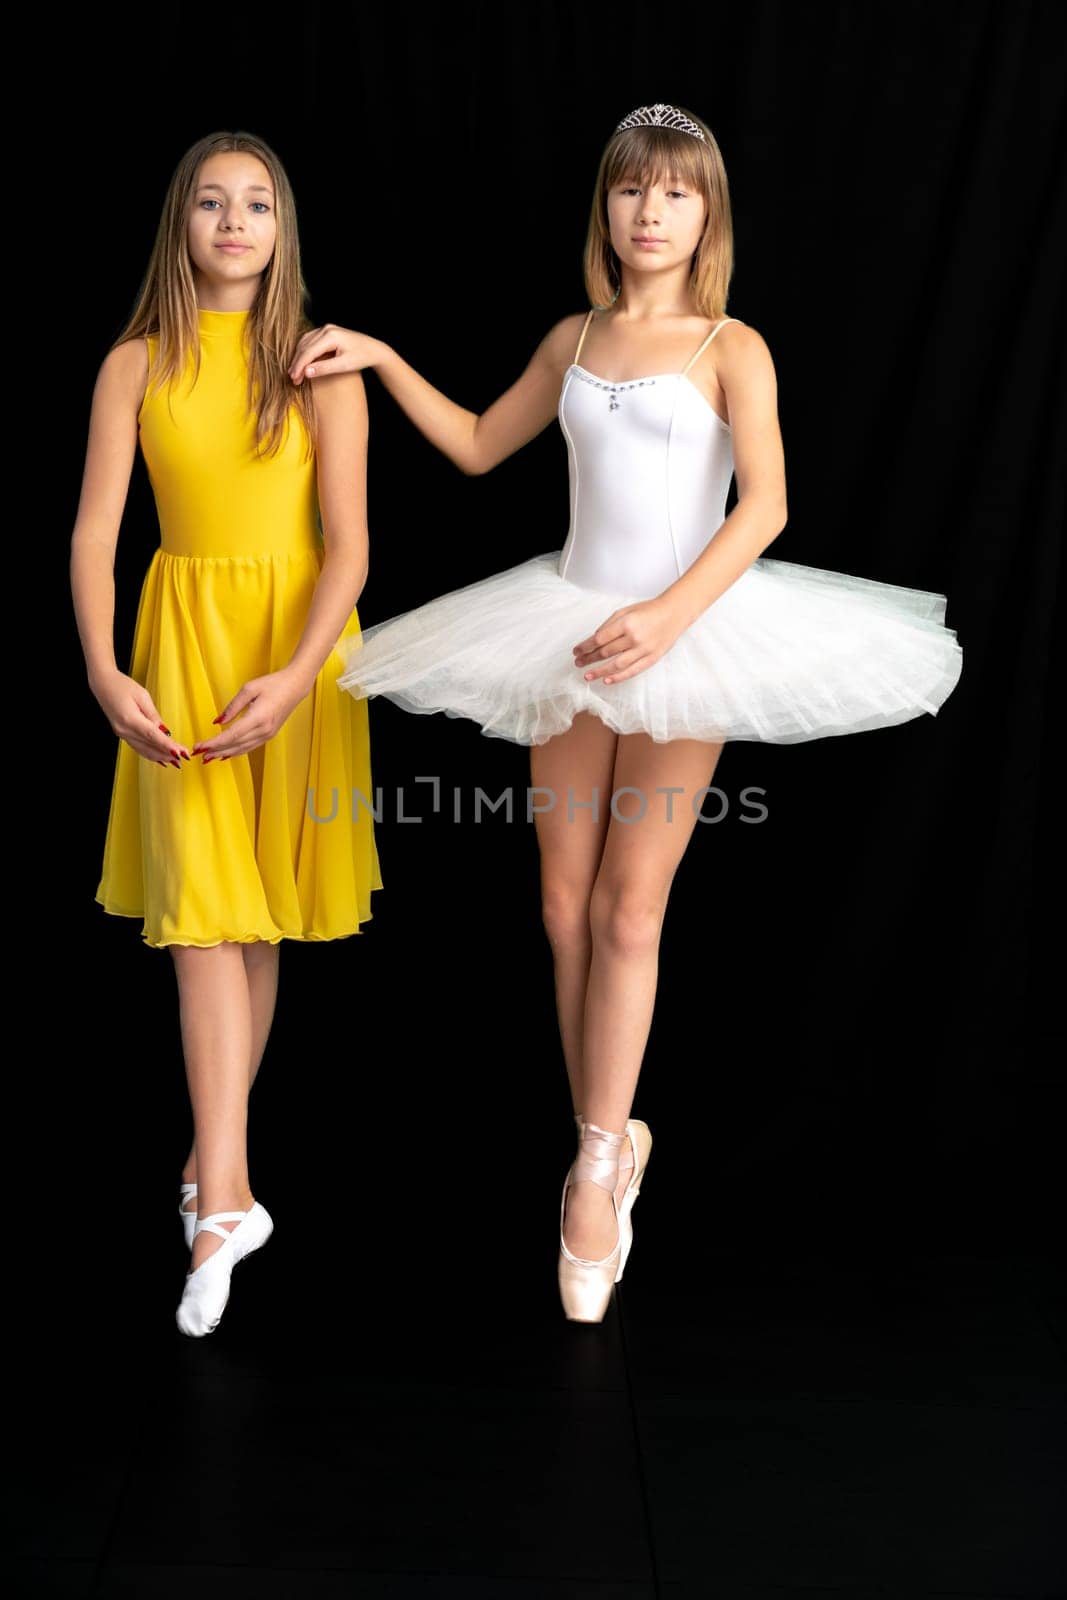 teenage ballerinas in the studio, portrait on a black background. High quality photo